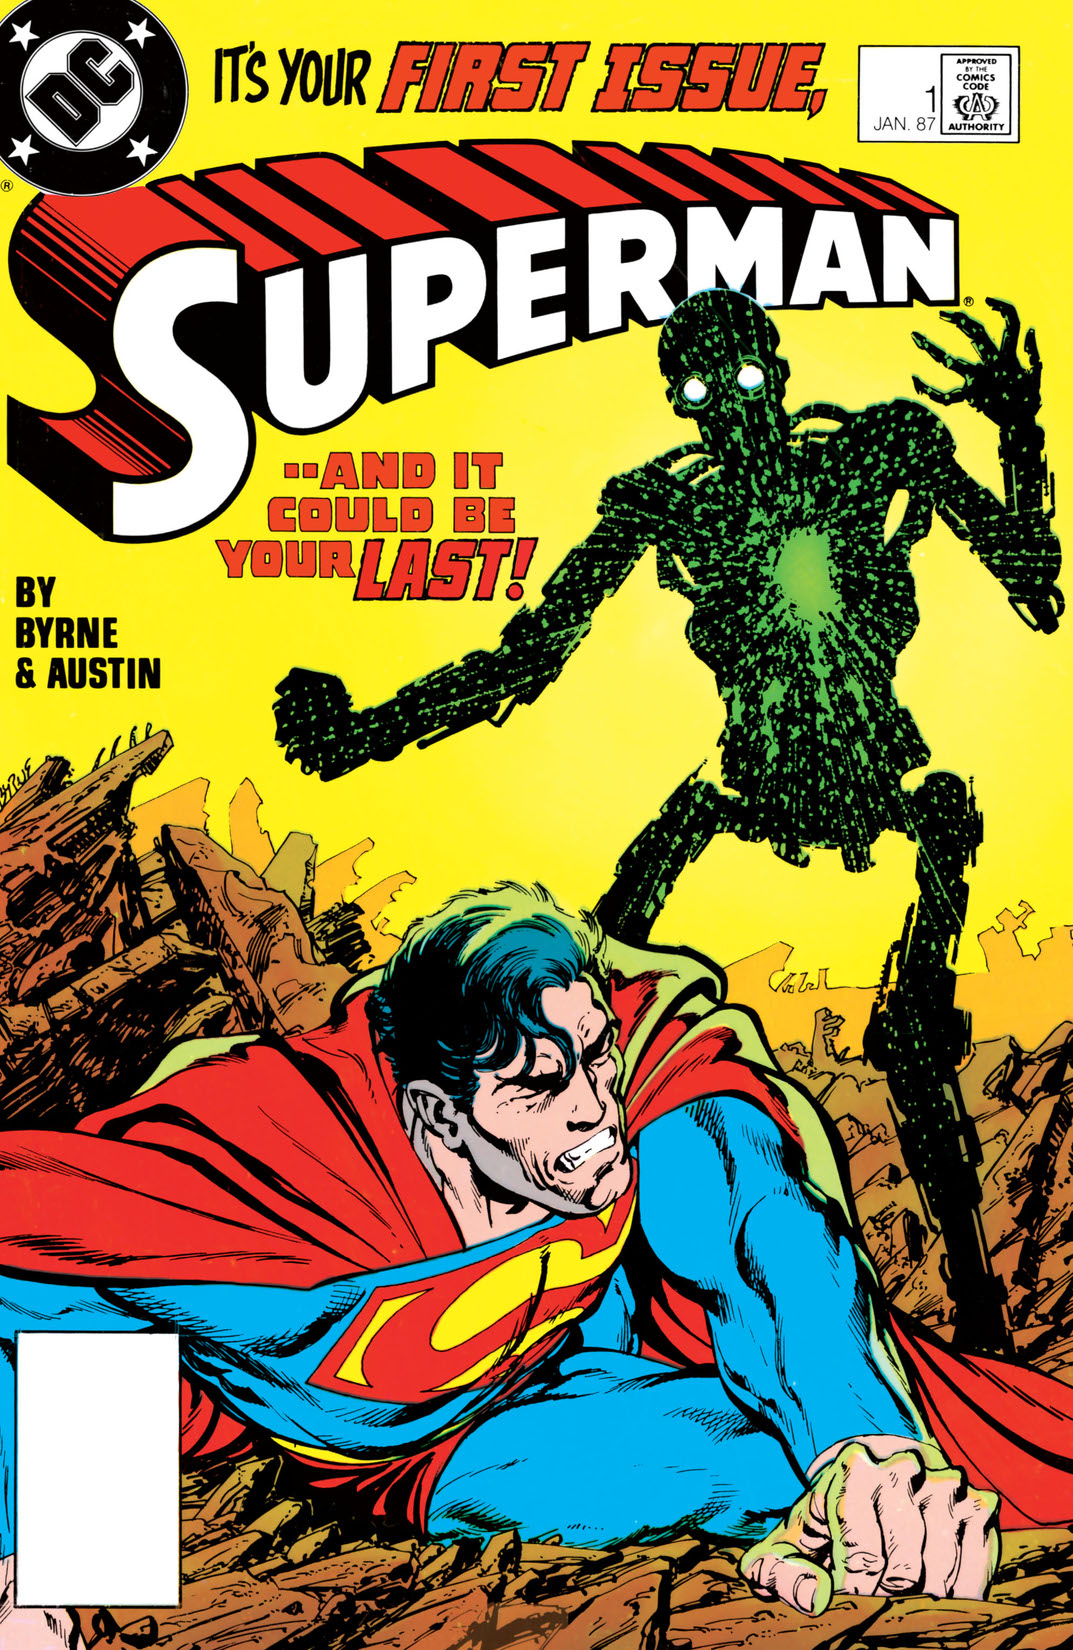 Superman (1986-) #1 preview images